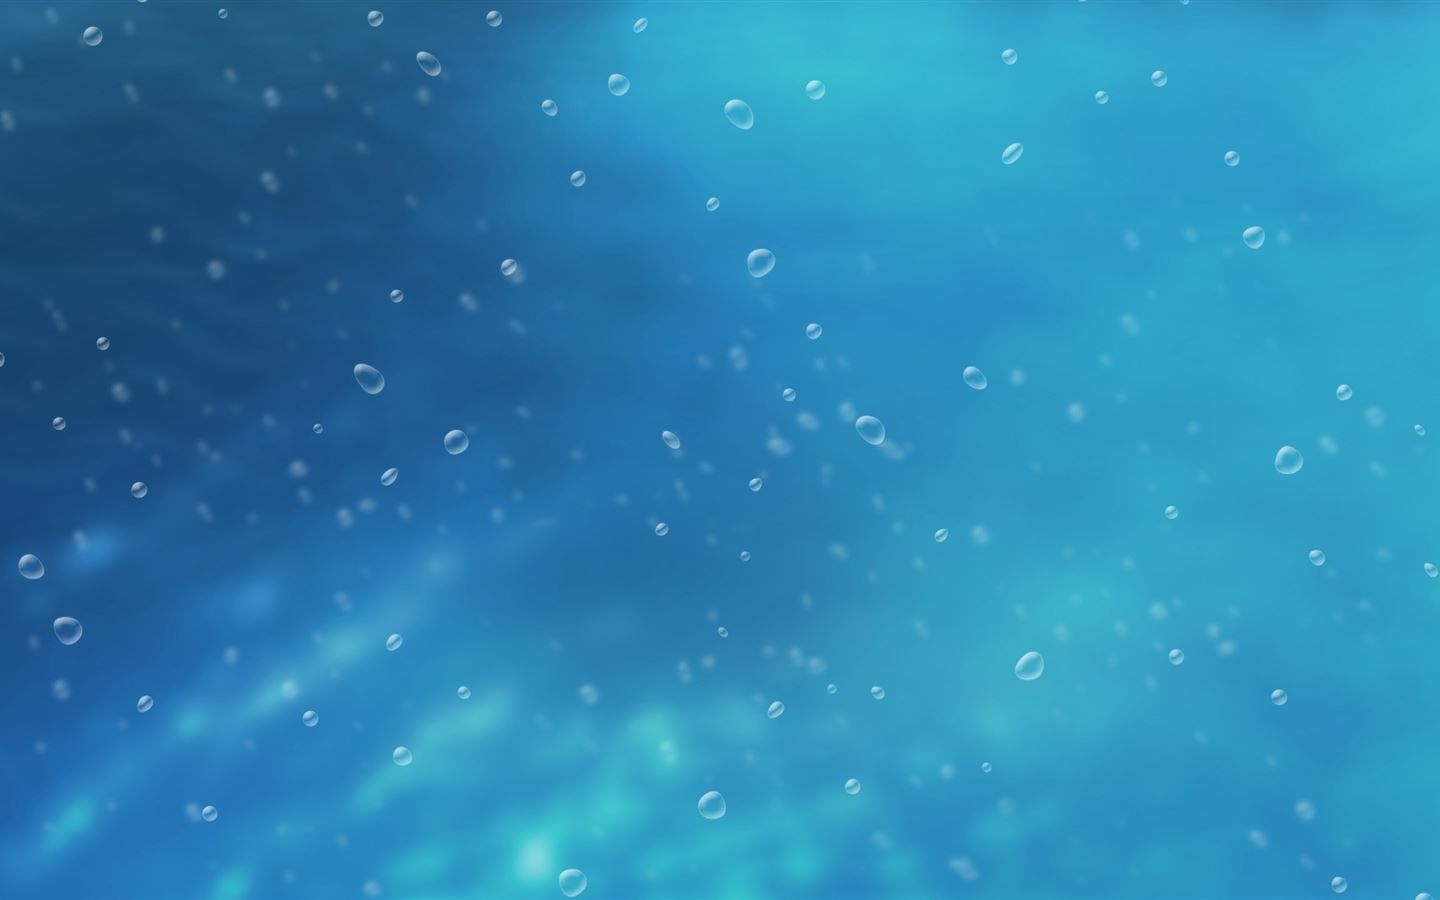 A blue and white water scene with bubbles - Bubbles